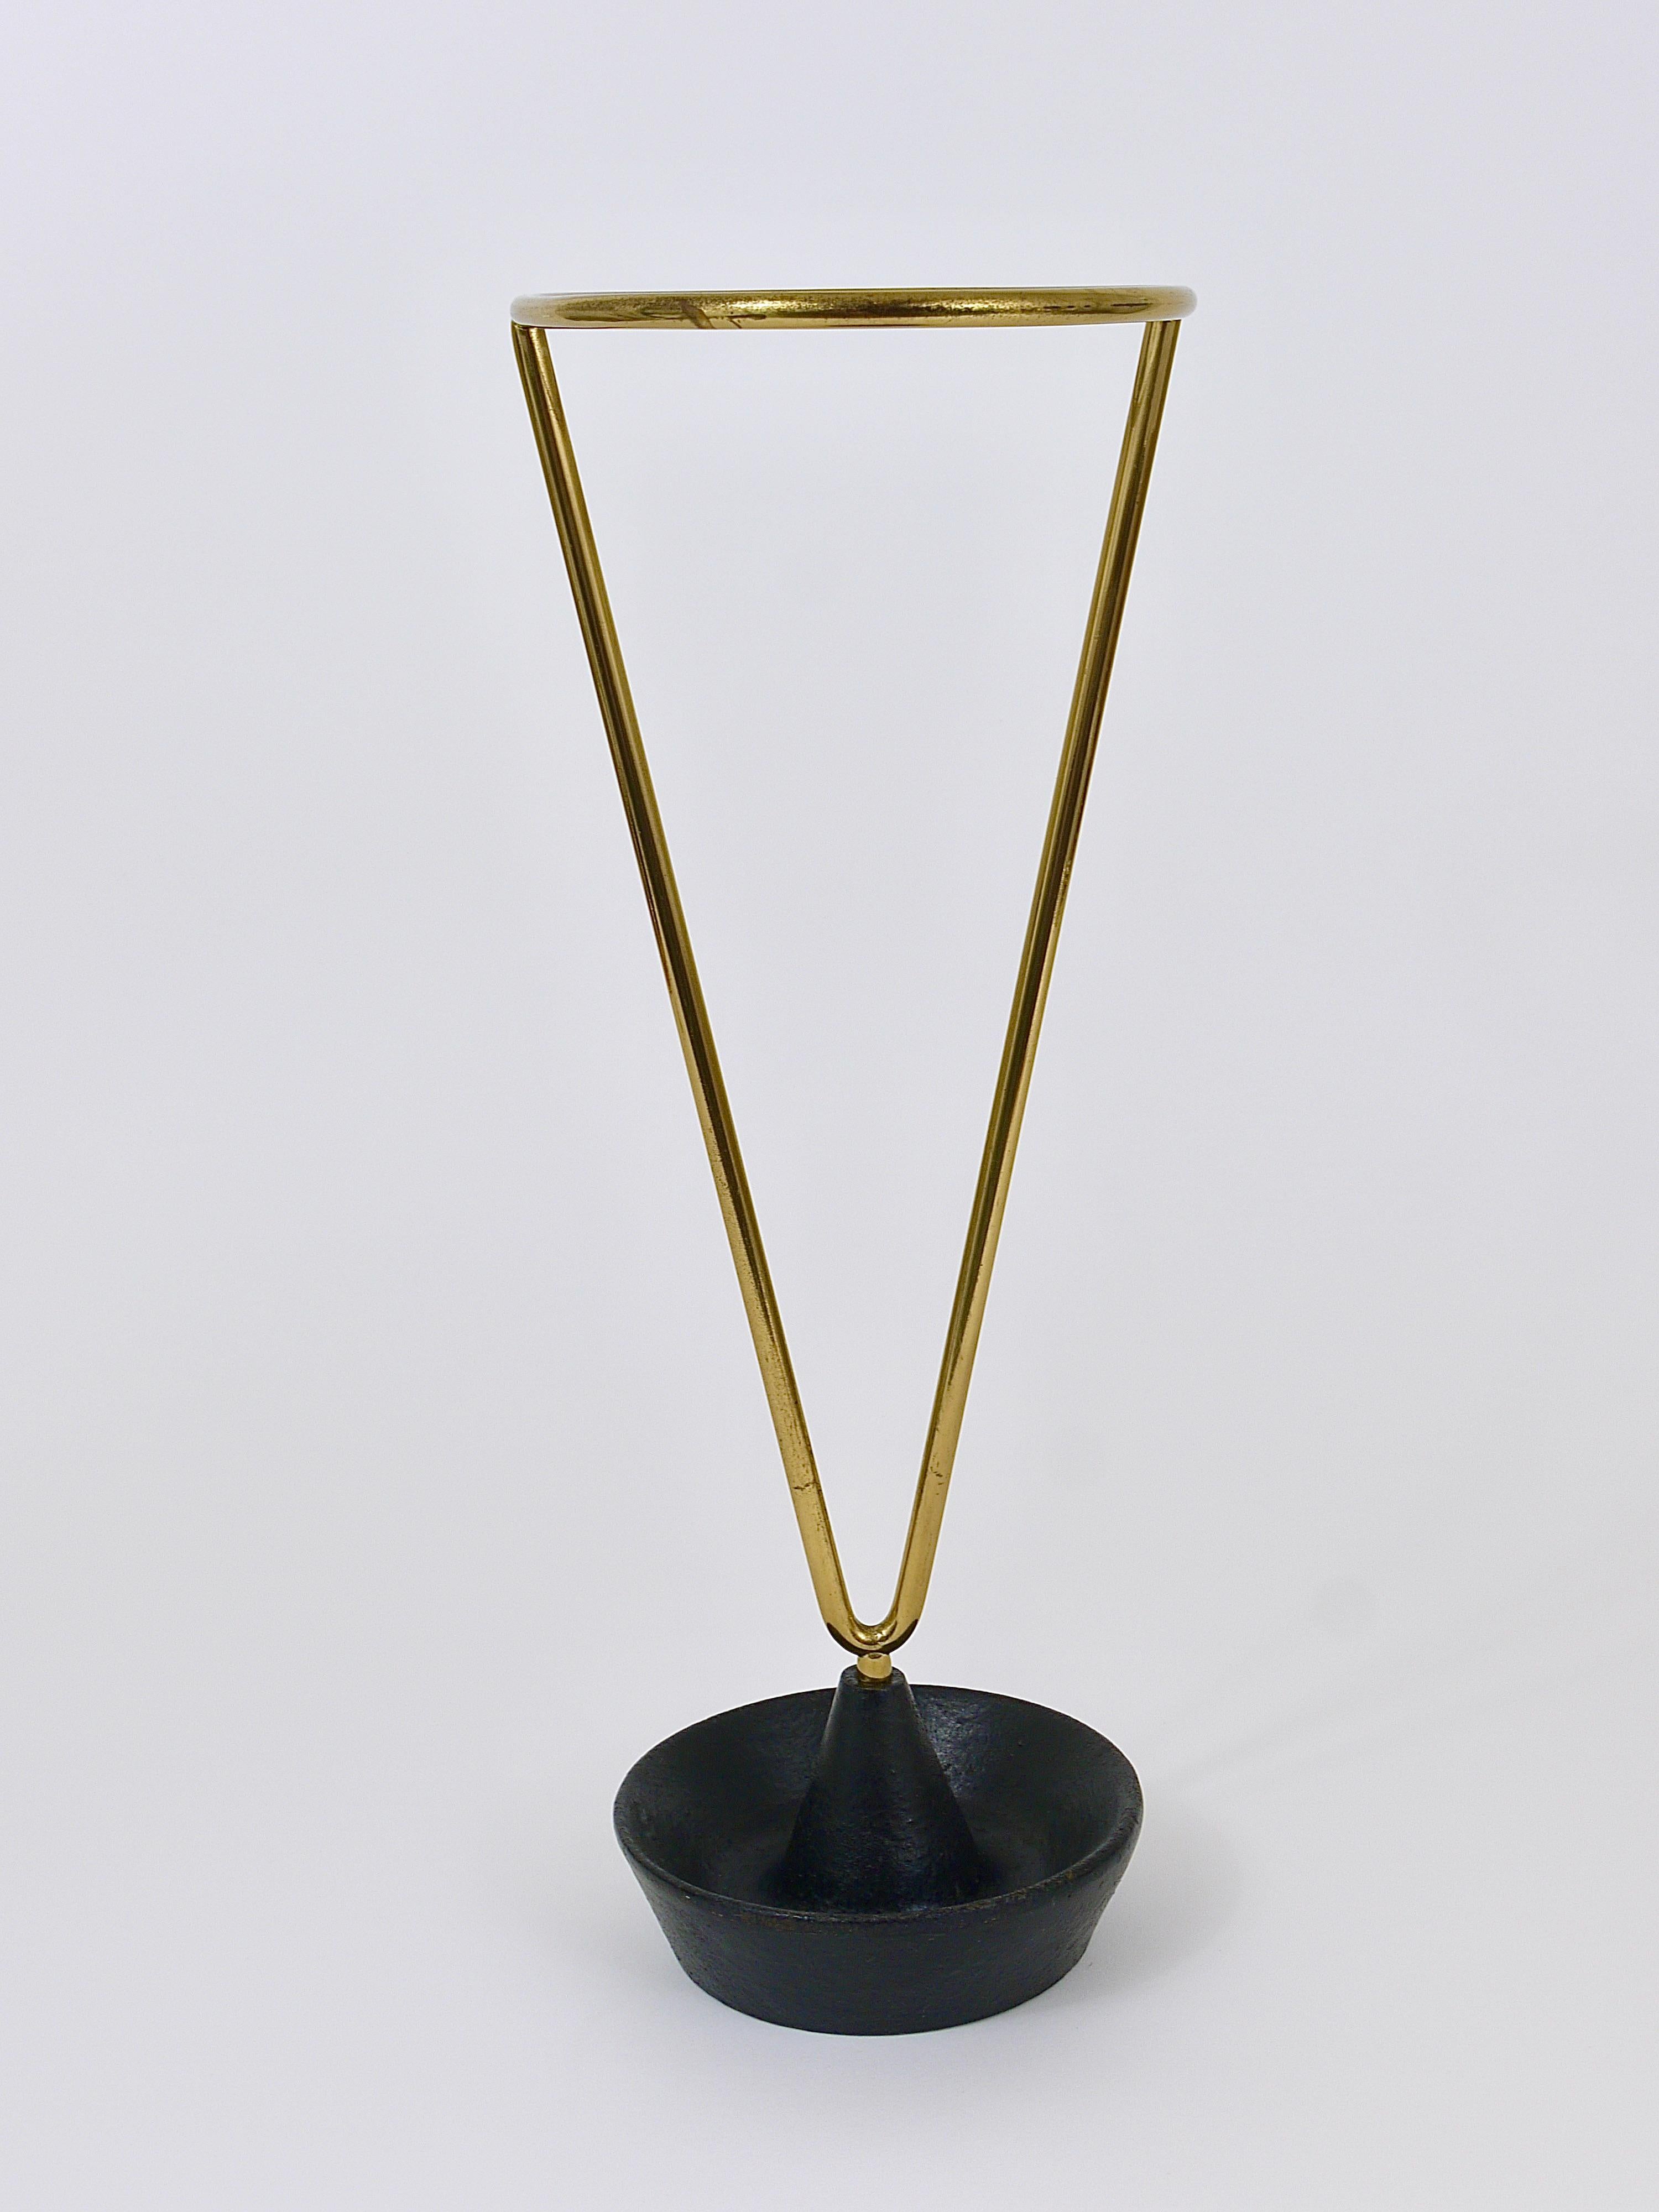 Carl Auböck Mid-Century Brass and Cast Iron Umbrella Stand, Austria, 1950s For Sale 4